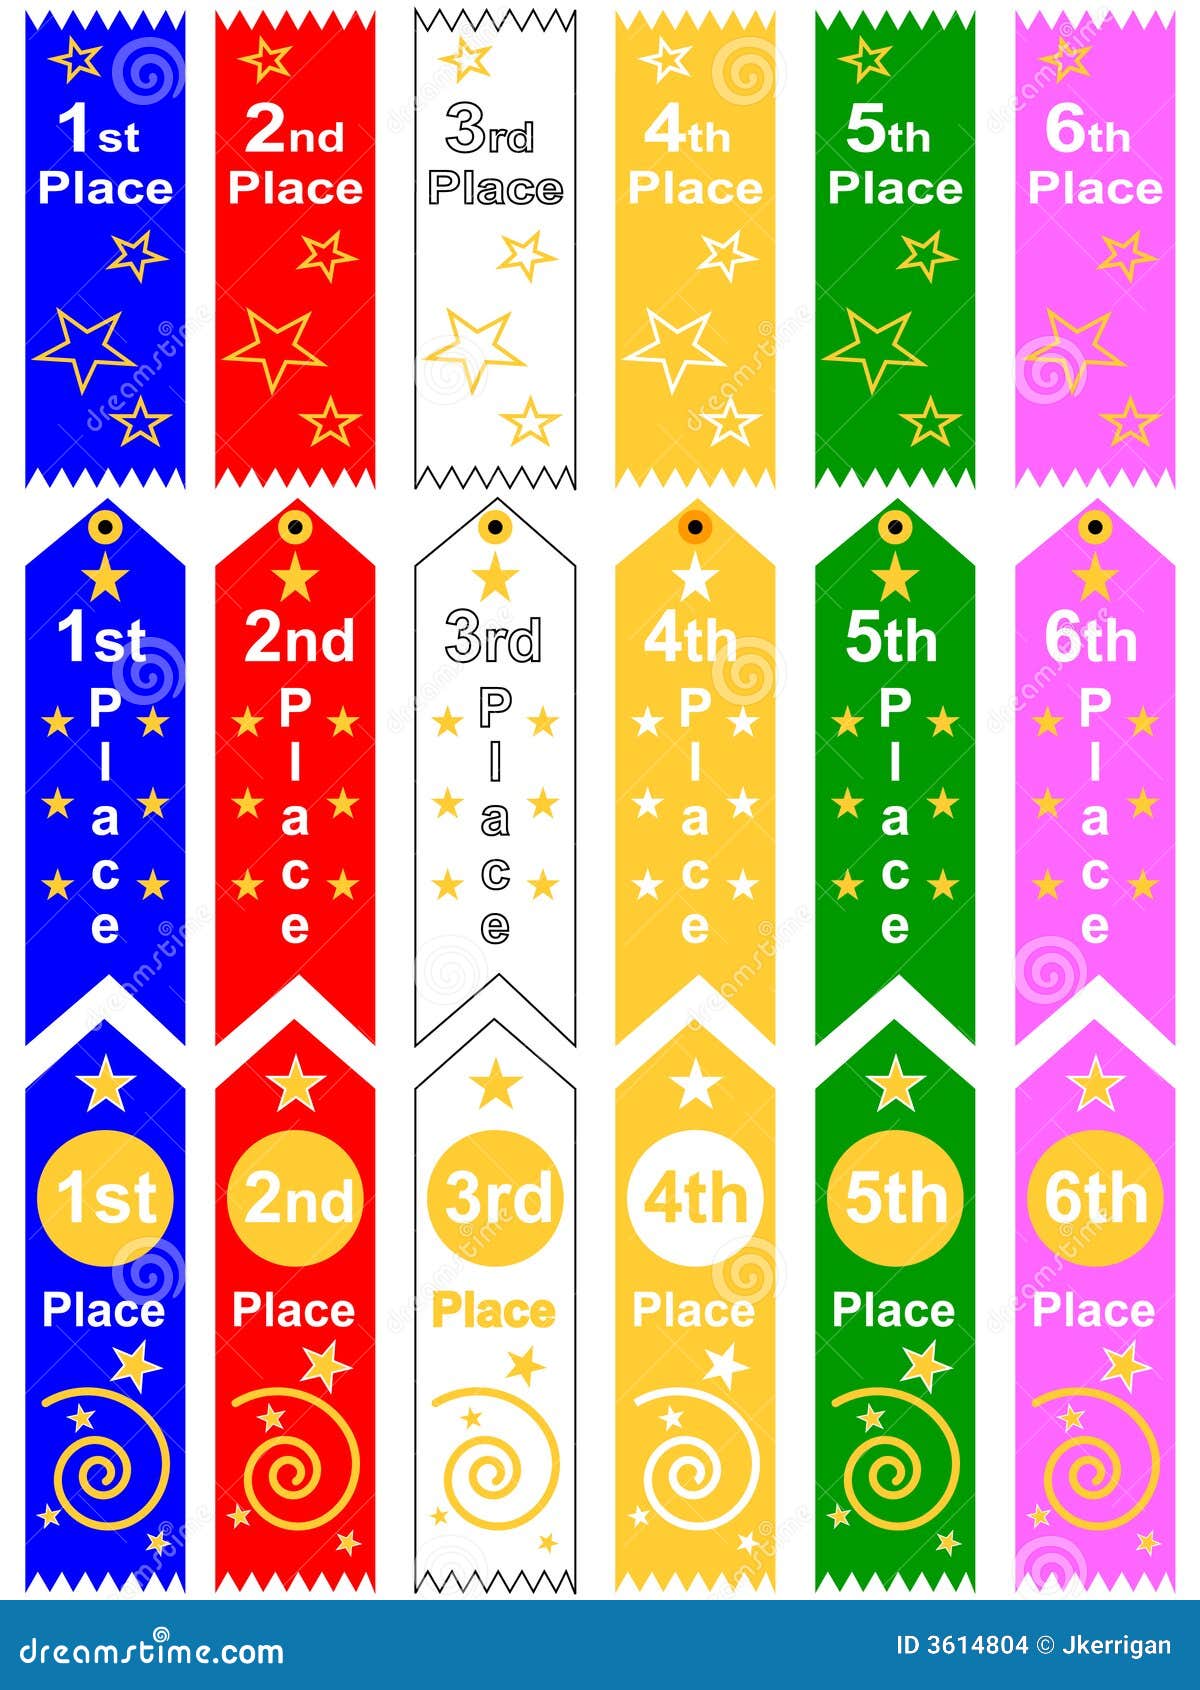 place ribbons